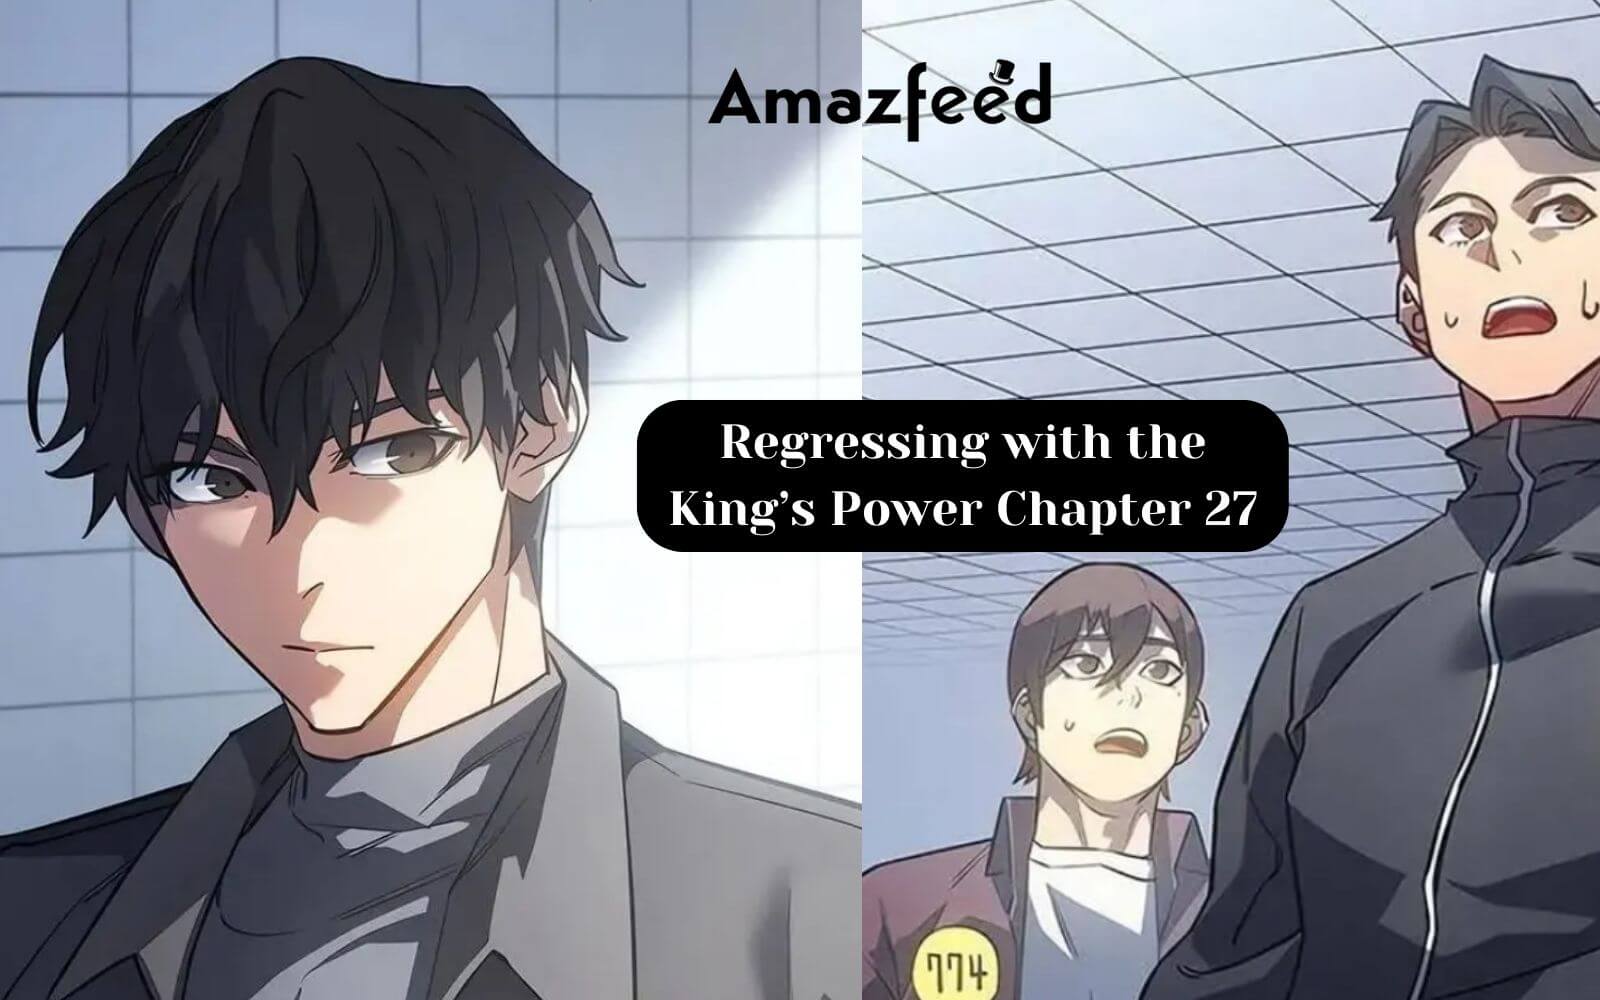 Regressing with the King’s Power Chapter 27